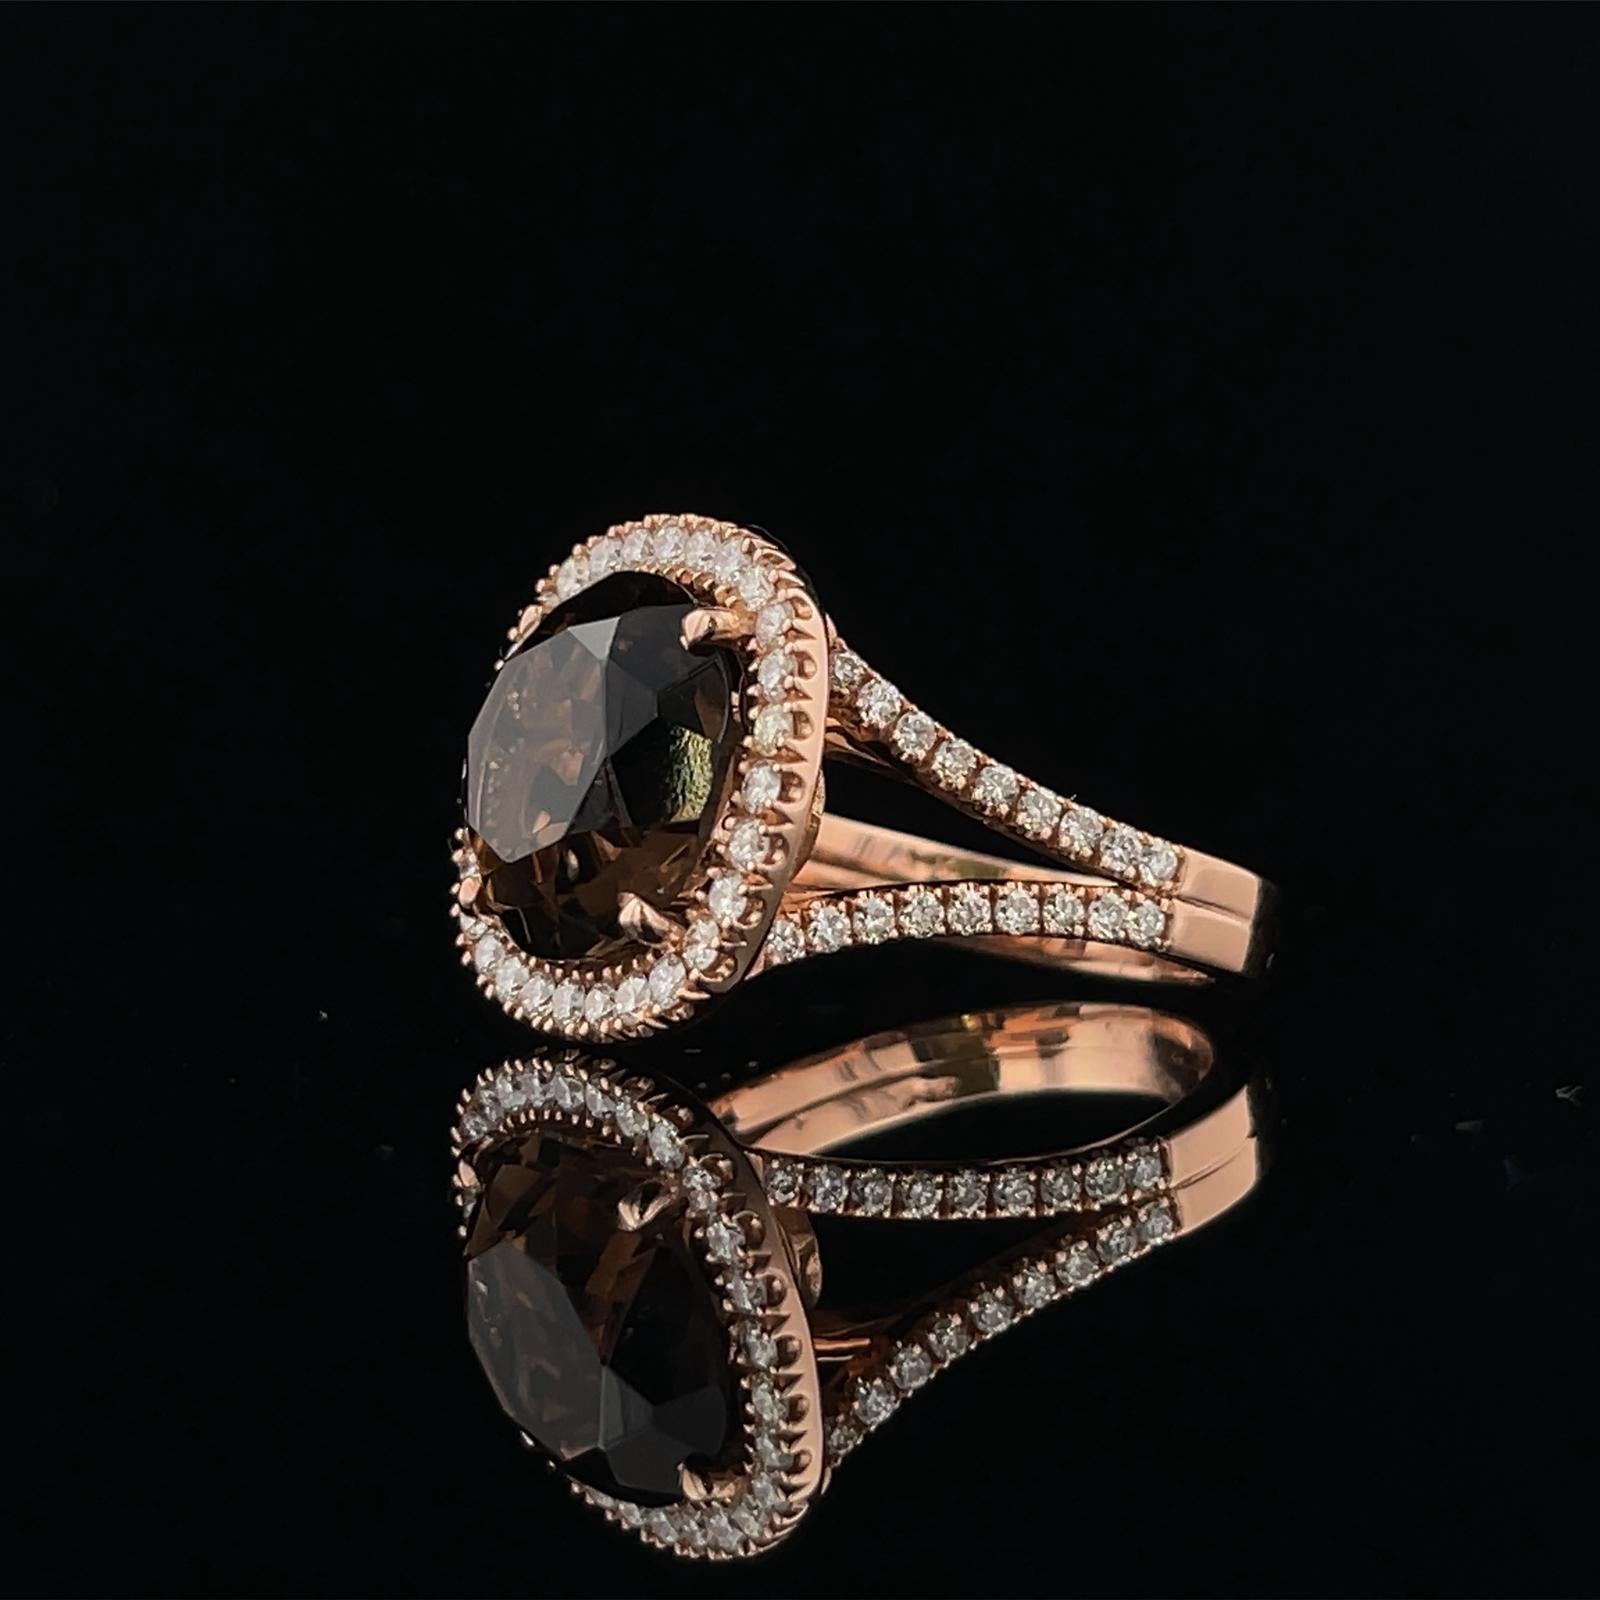 Talk about a show stopper! With a 5.56CT Cushion Cut Smokey Topaz center, this ring hold Sixty-Four (64) Round Diamonds Weighing 0.95CTW all in 14K Rose Gold  
Size 6.5 

Smokey Topaz - 12.2 x 7.1 mm 
Diamonds - 1.6mm & 1.3mm